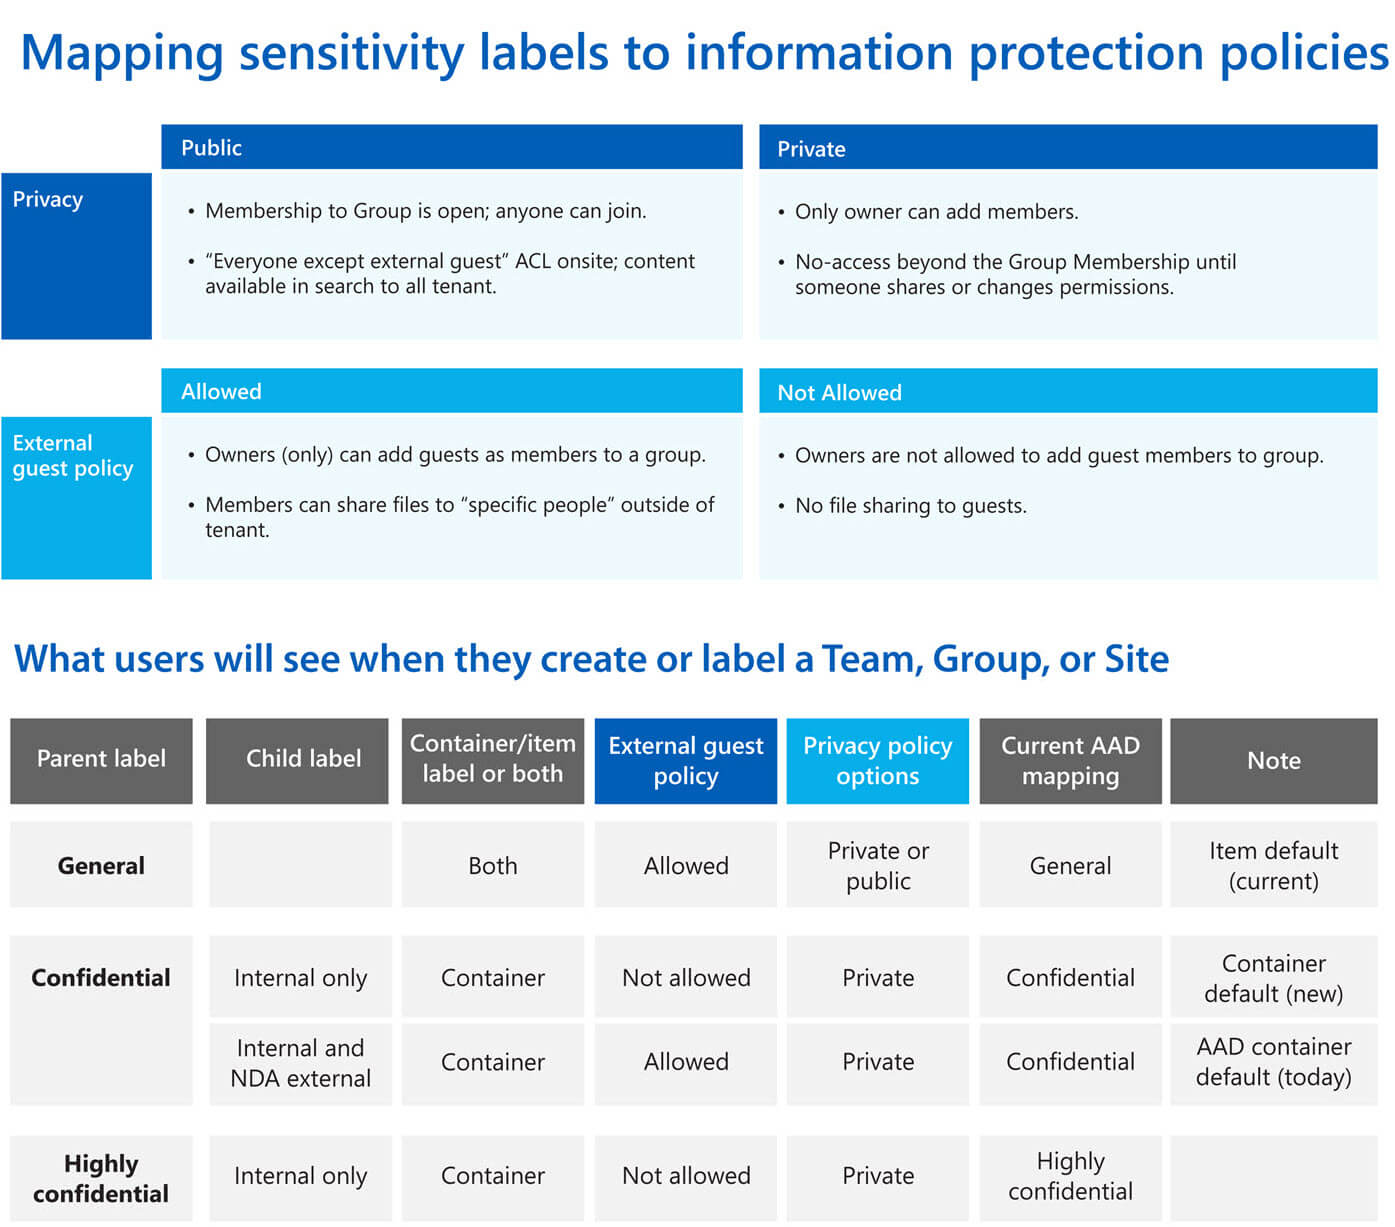 A graphic revealing Microsoft’s sensitivity labels and how they relate to various information protection protocols.